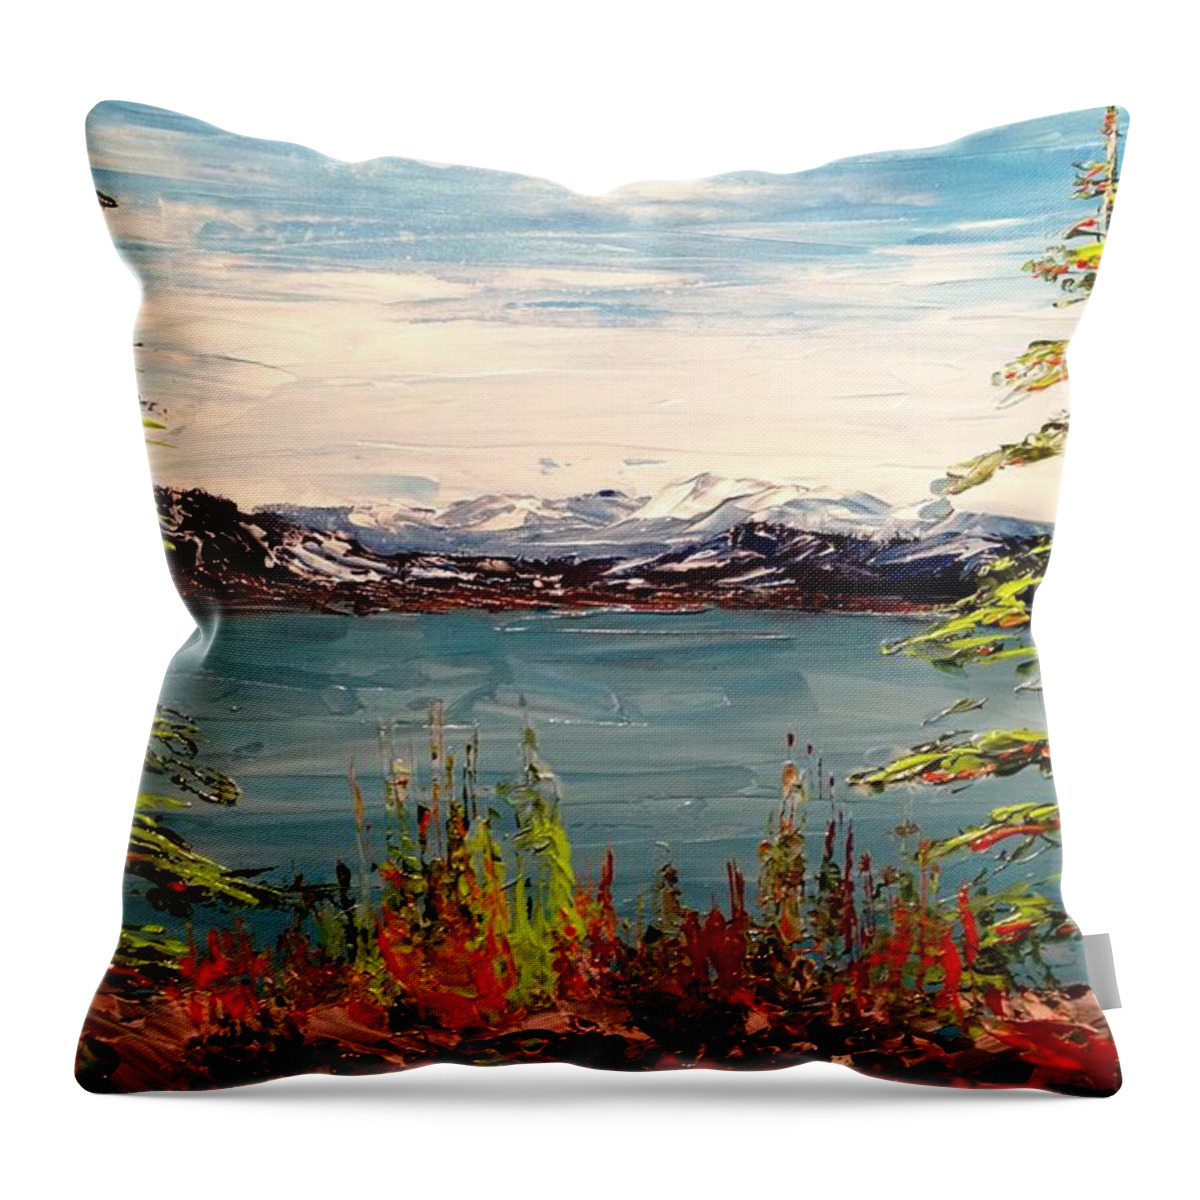 Abstract Landscape Painting Throw Pillow featuring the painting The View Between the Pines by Desmond Raymond